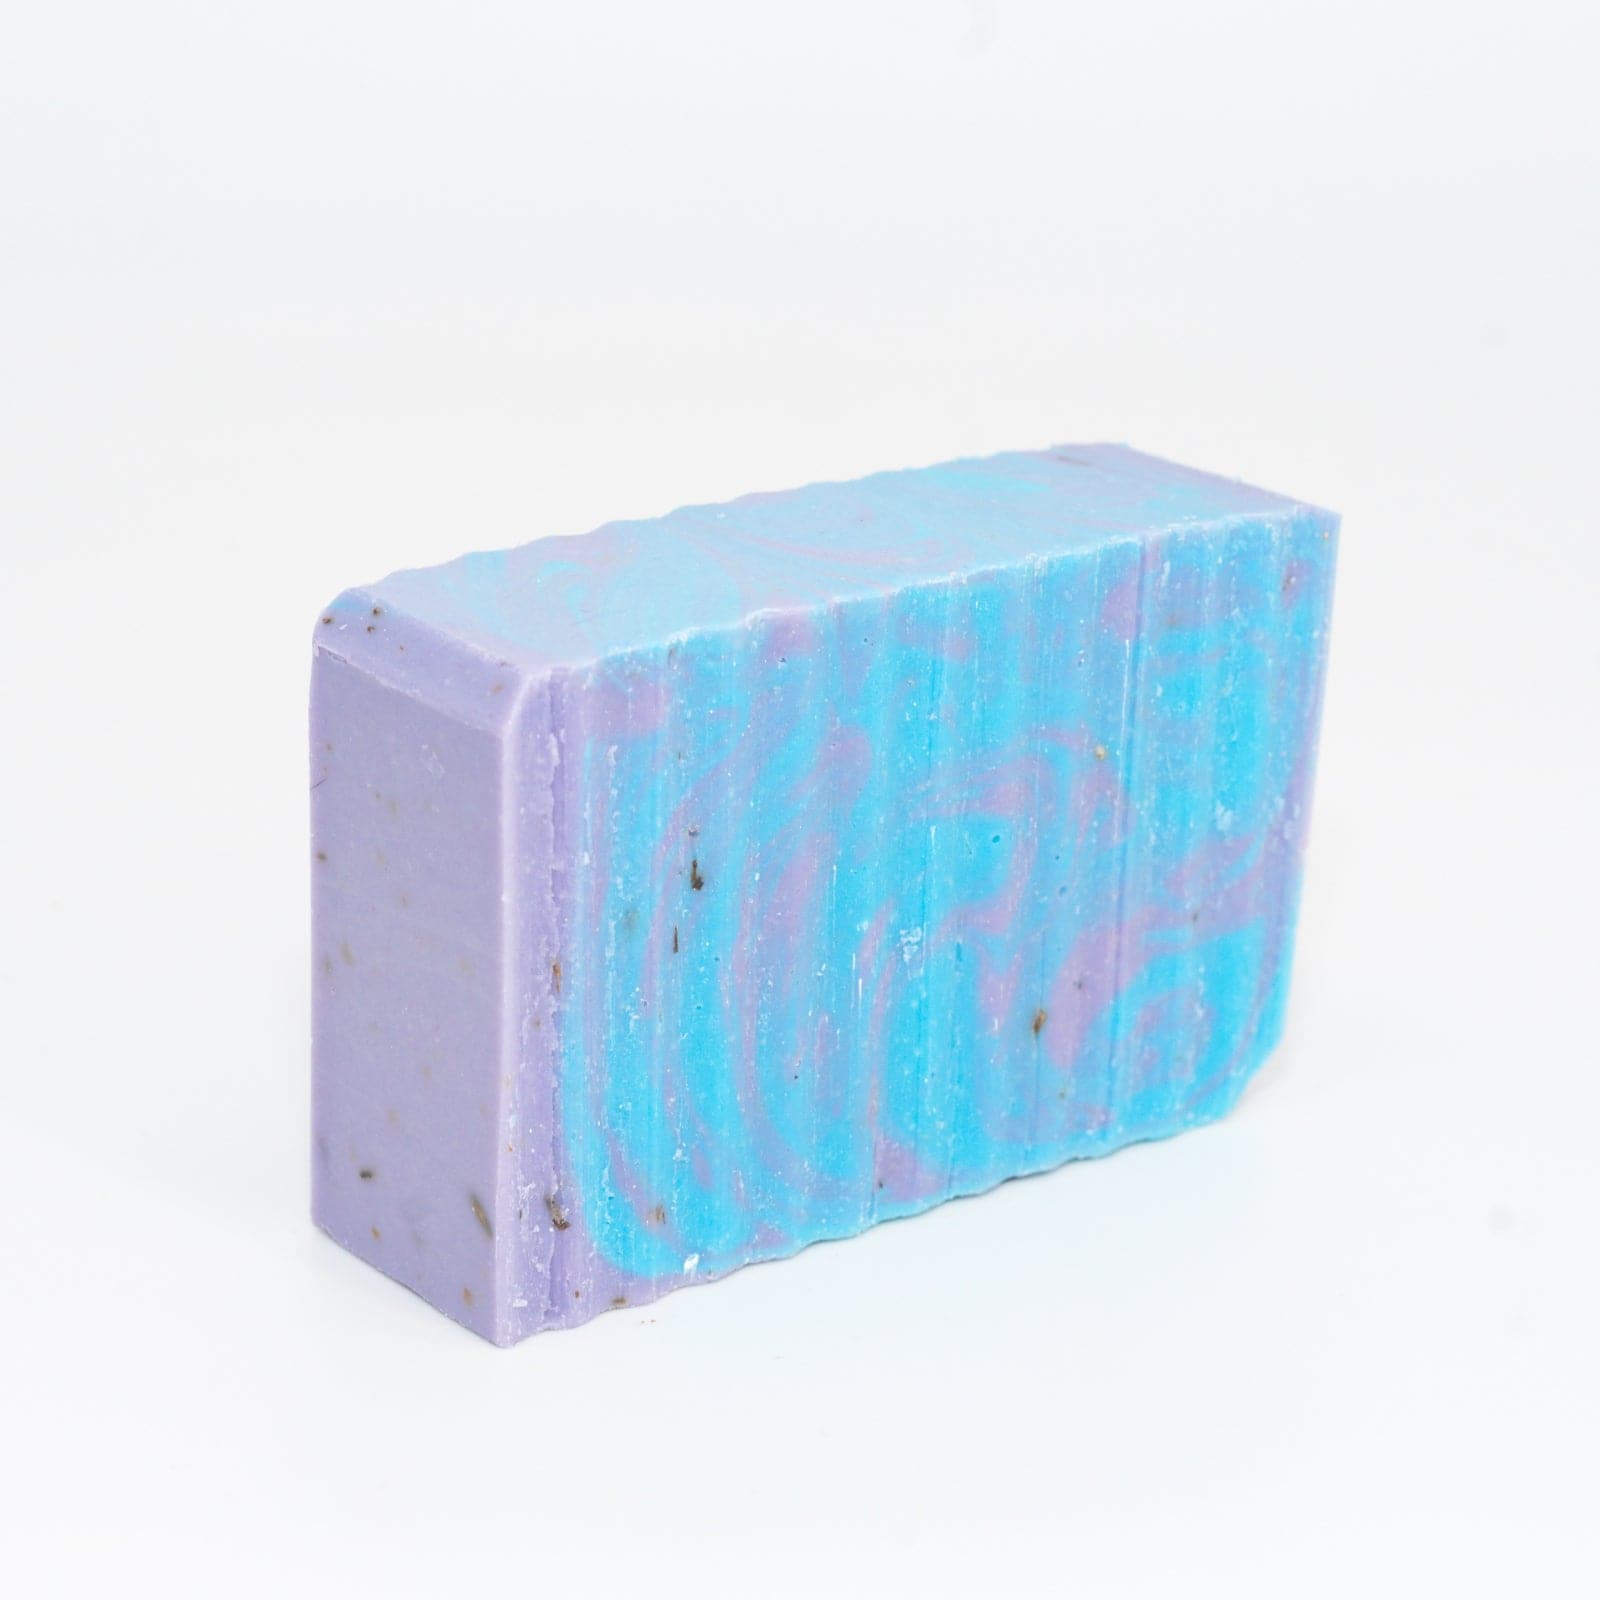 A bar of Buff City Soap's lavender colored with blue and purple swirls